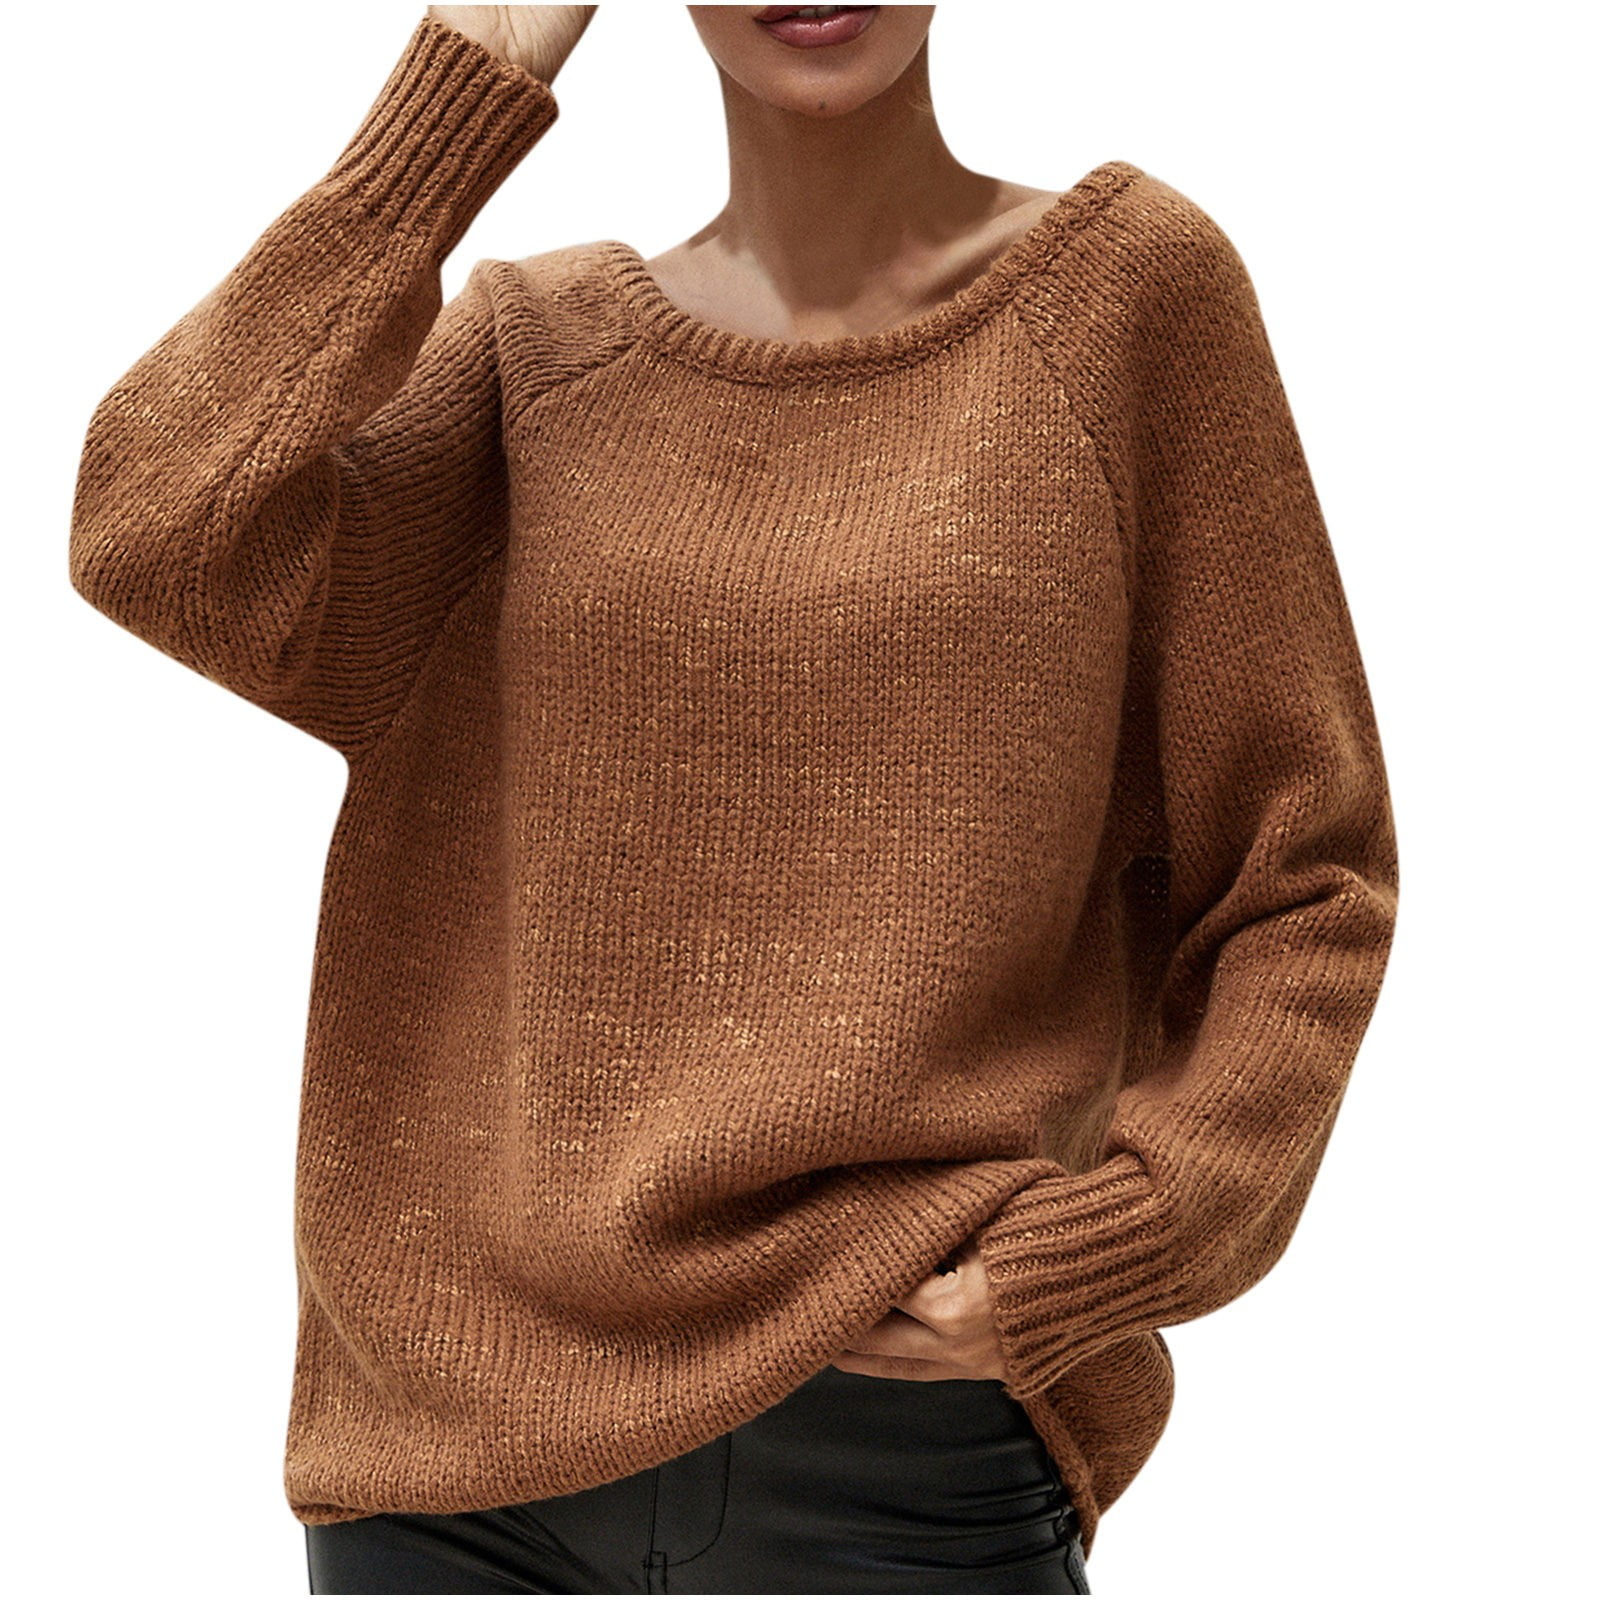 Women's Solid Color Knitwear Elegant,1 Dollar Items for Teens,Under 1  Dollar Items only,Prime Deals on oct 11 and 12prime Lightning Deals  Today,Warehouse Sale Clearance Returns pallets at  Women's Clothing  store